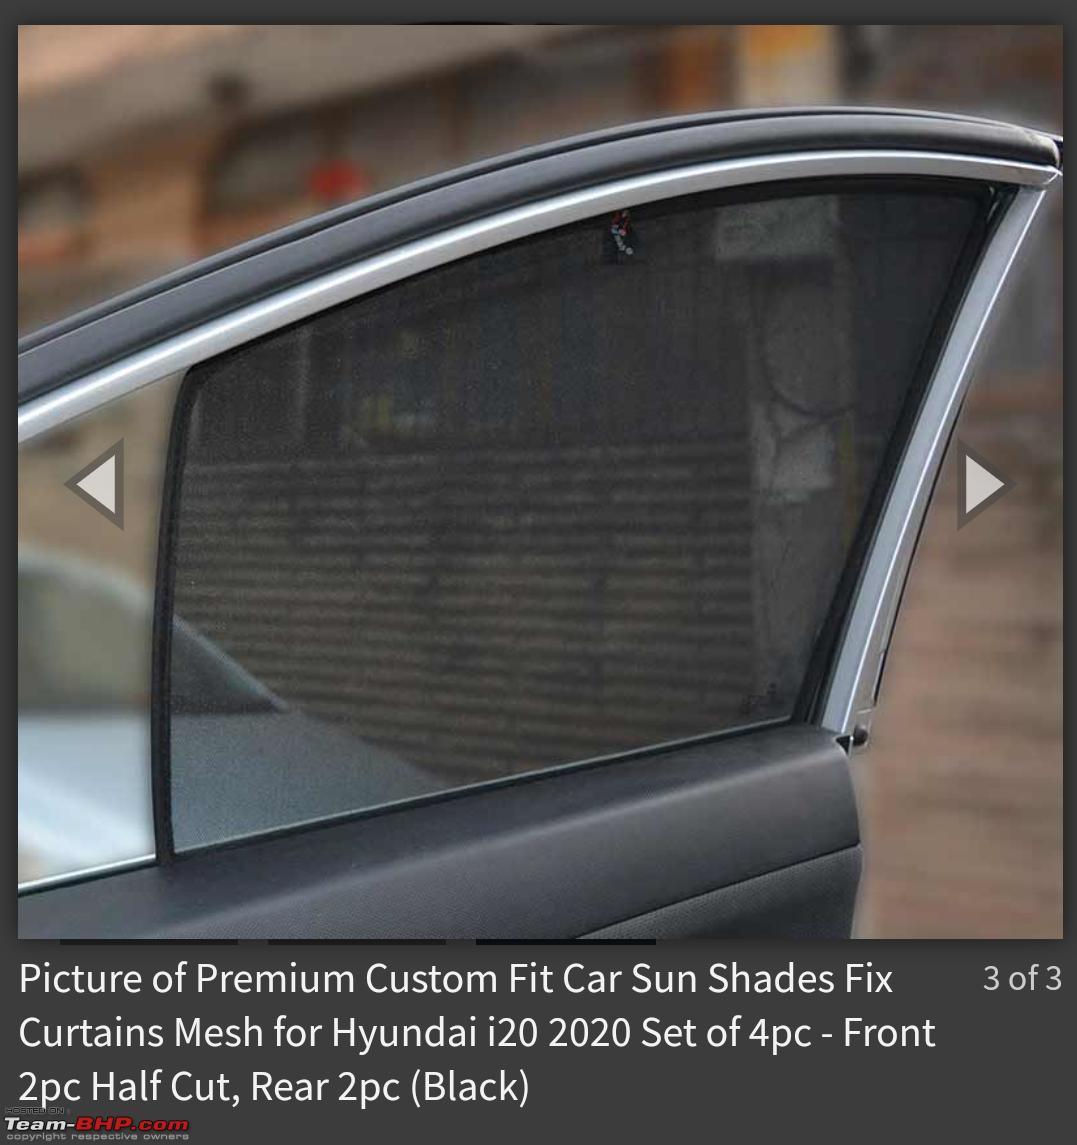 3M, Buy 3M Sun Control Film: RE Series for Sides & Rear - Large Car/SUV